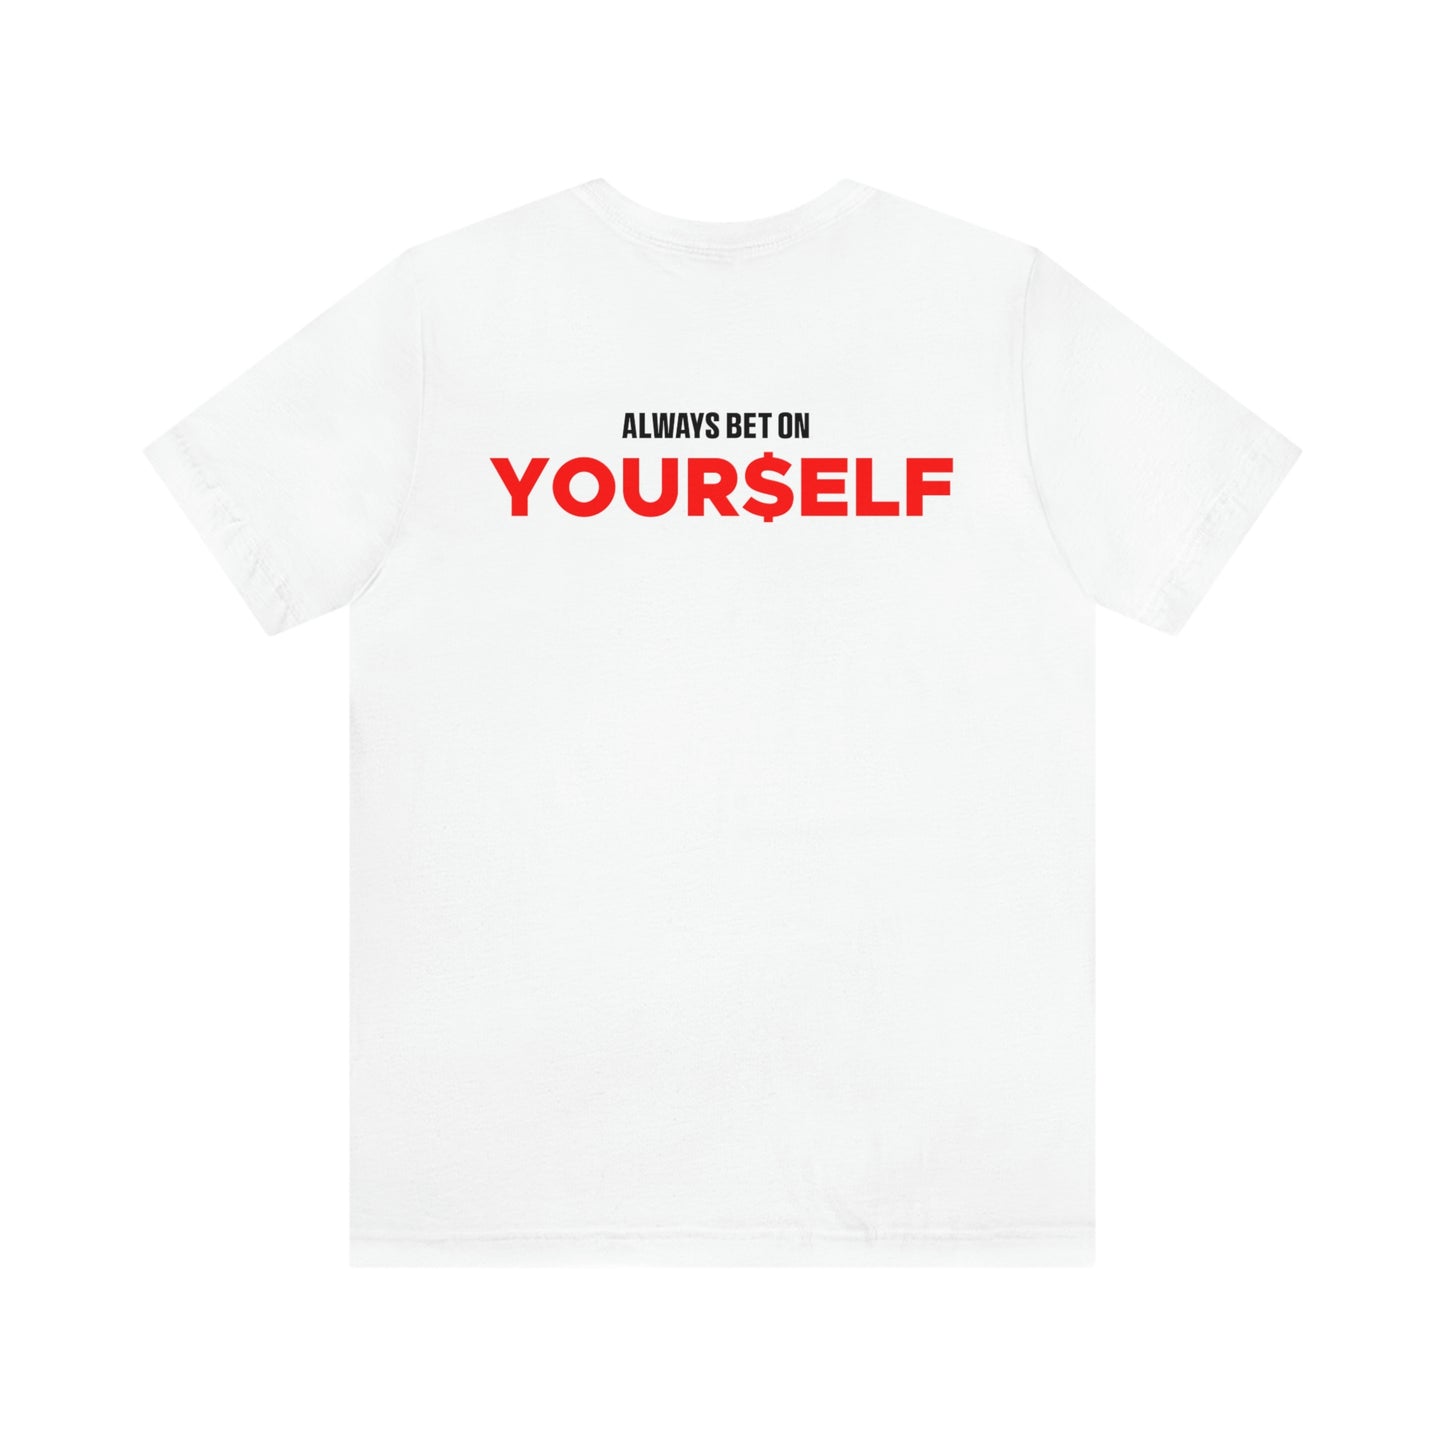 R'Mani Taylor: Bet on Yourself Tee